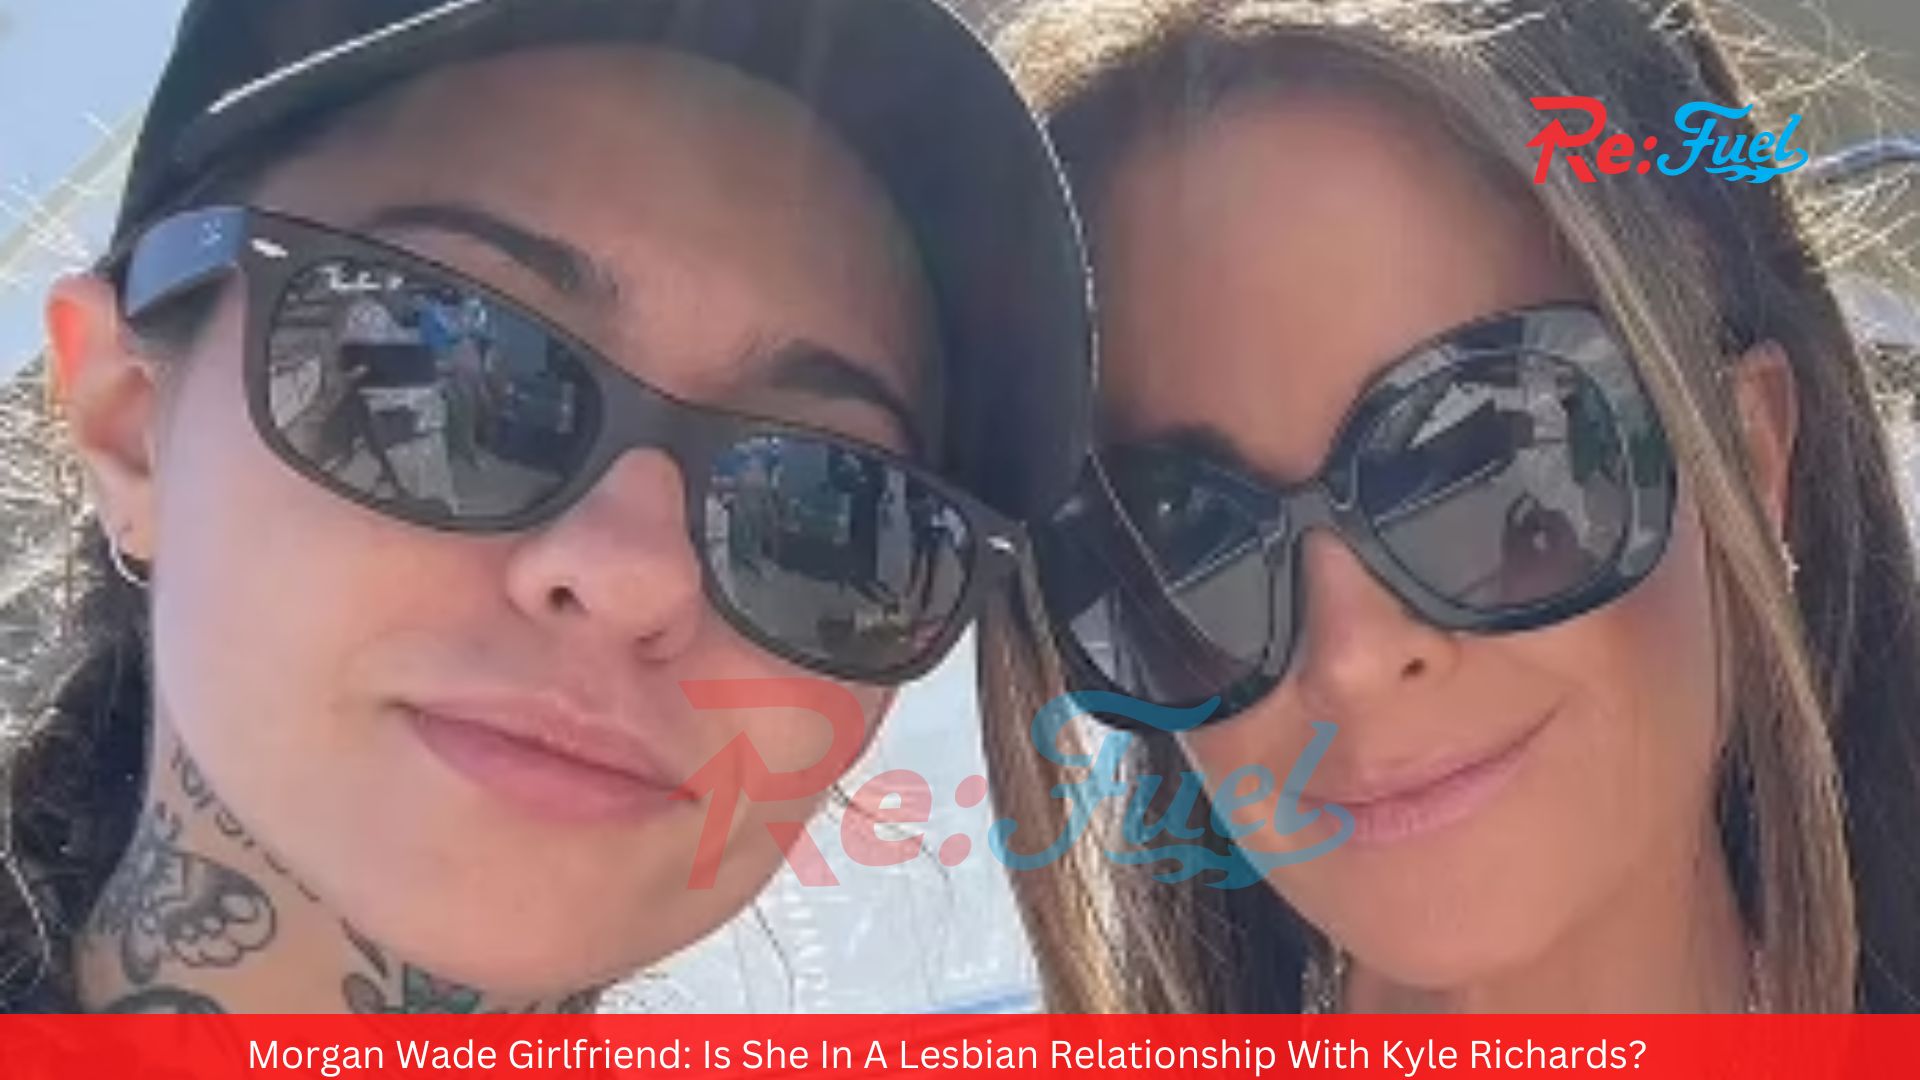 Morgan Wade Girlfriend: Is She In A Lesbian Relationship With Kyle Richards?